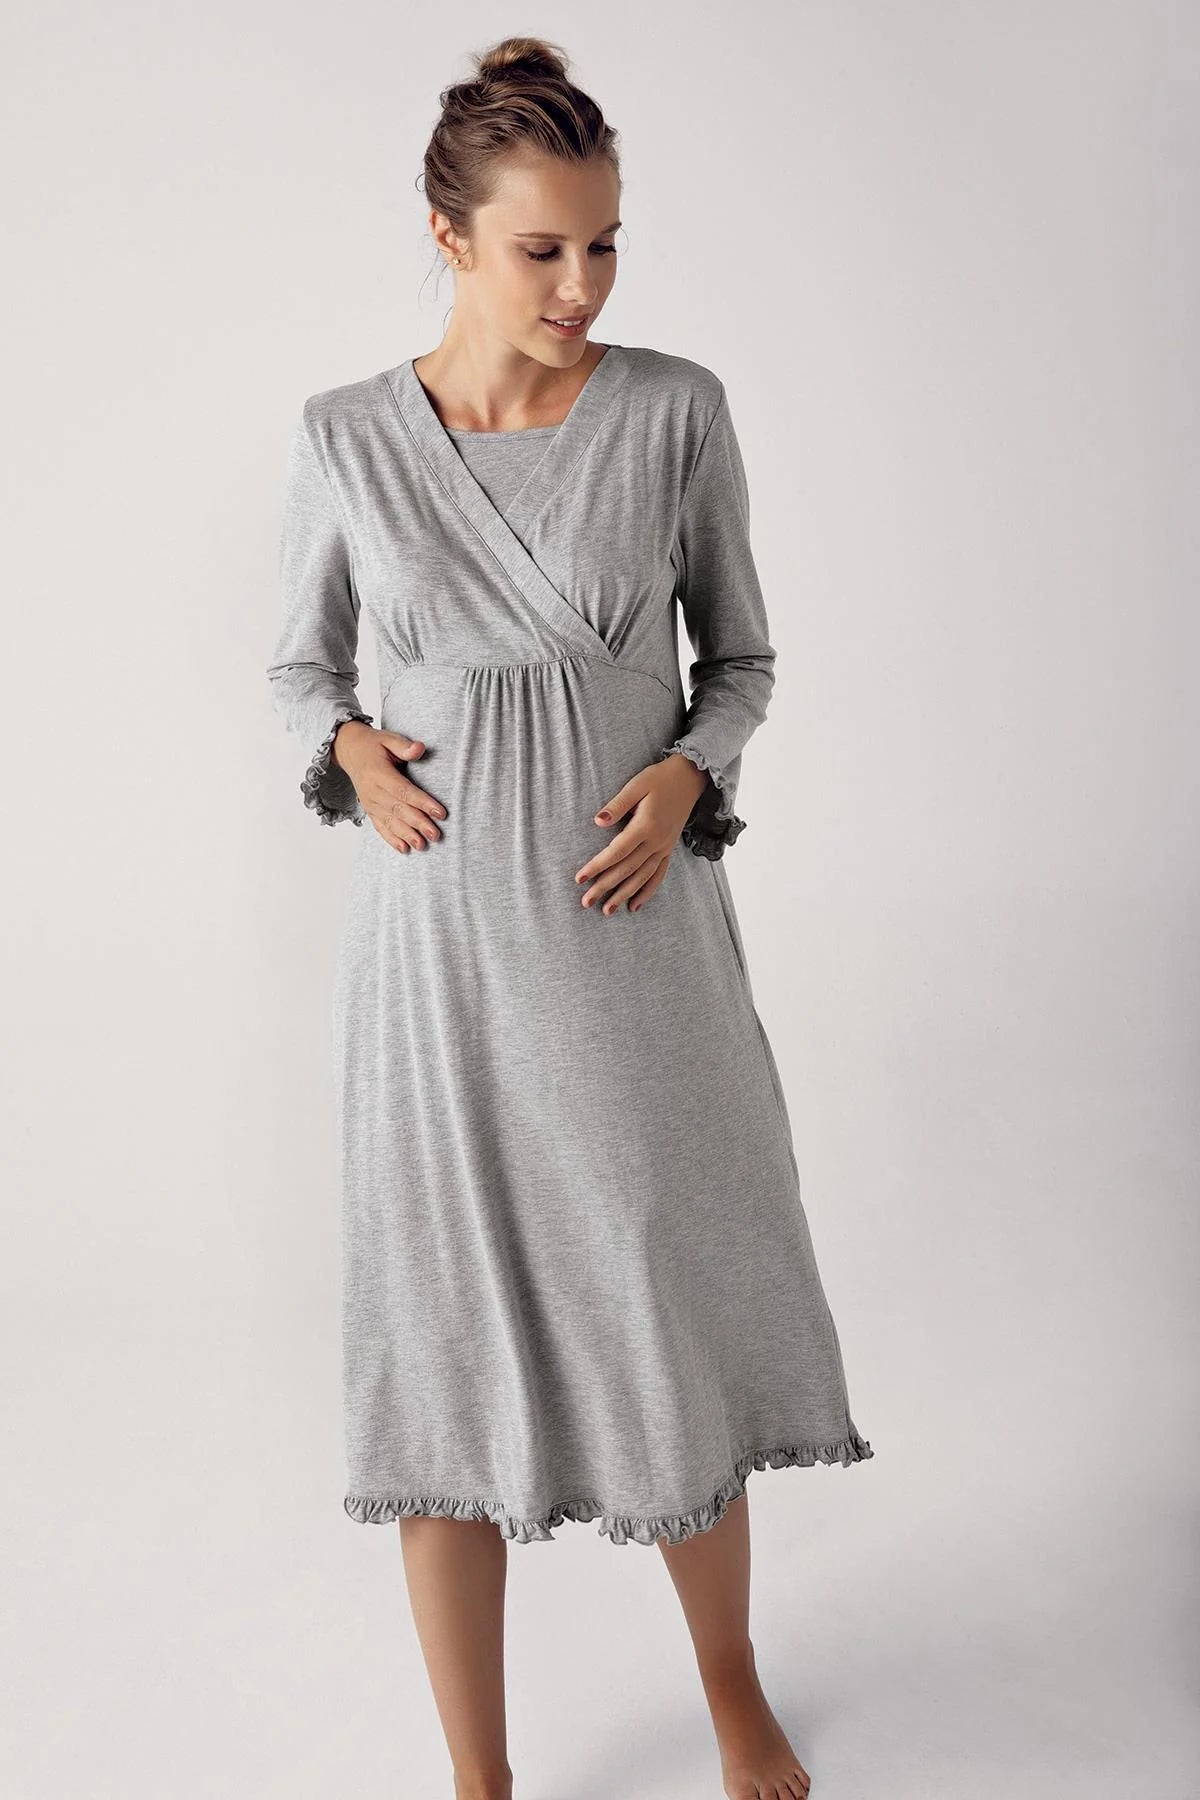 Shopymommy 13112 Double Breasted Maternity & Nursing Nightgown Grey